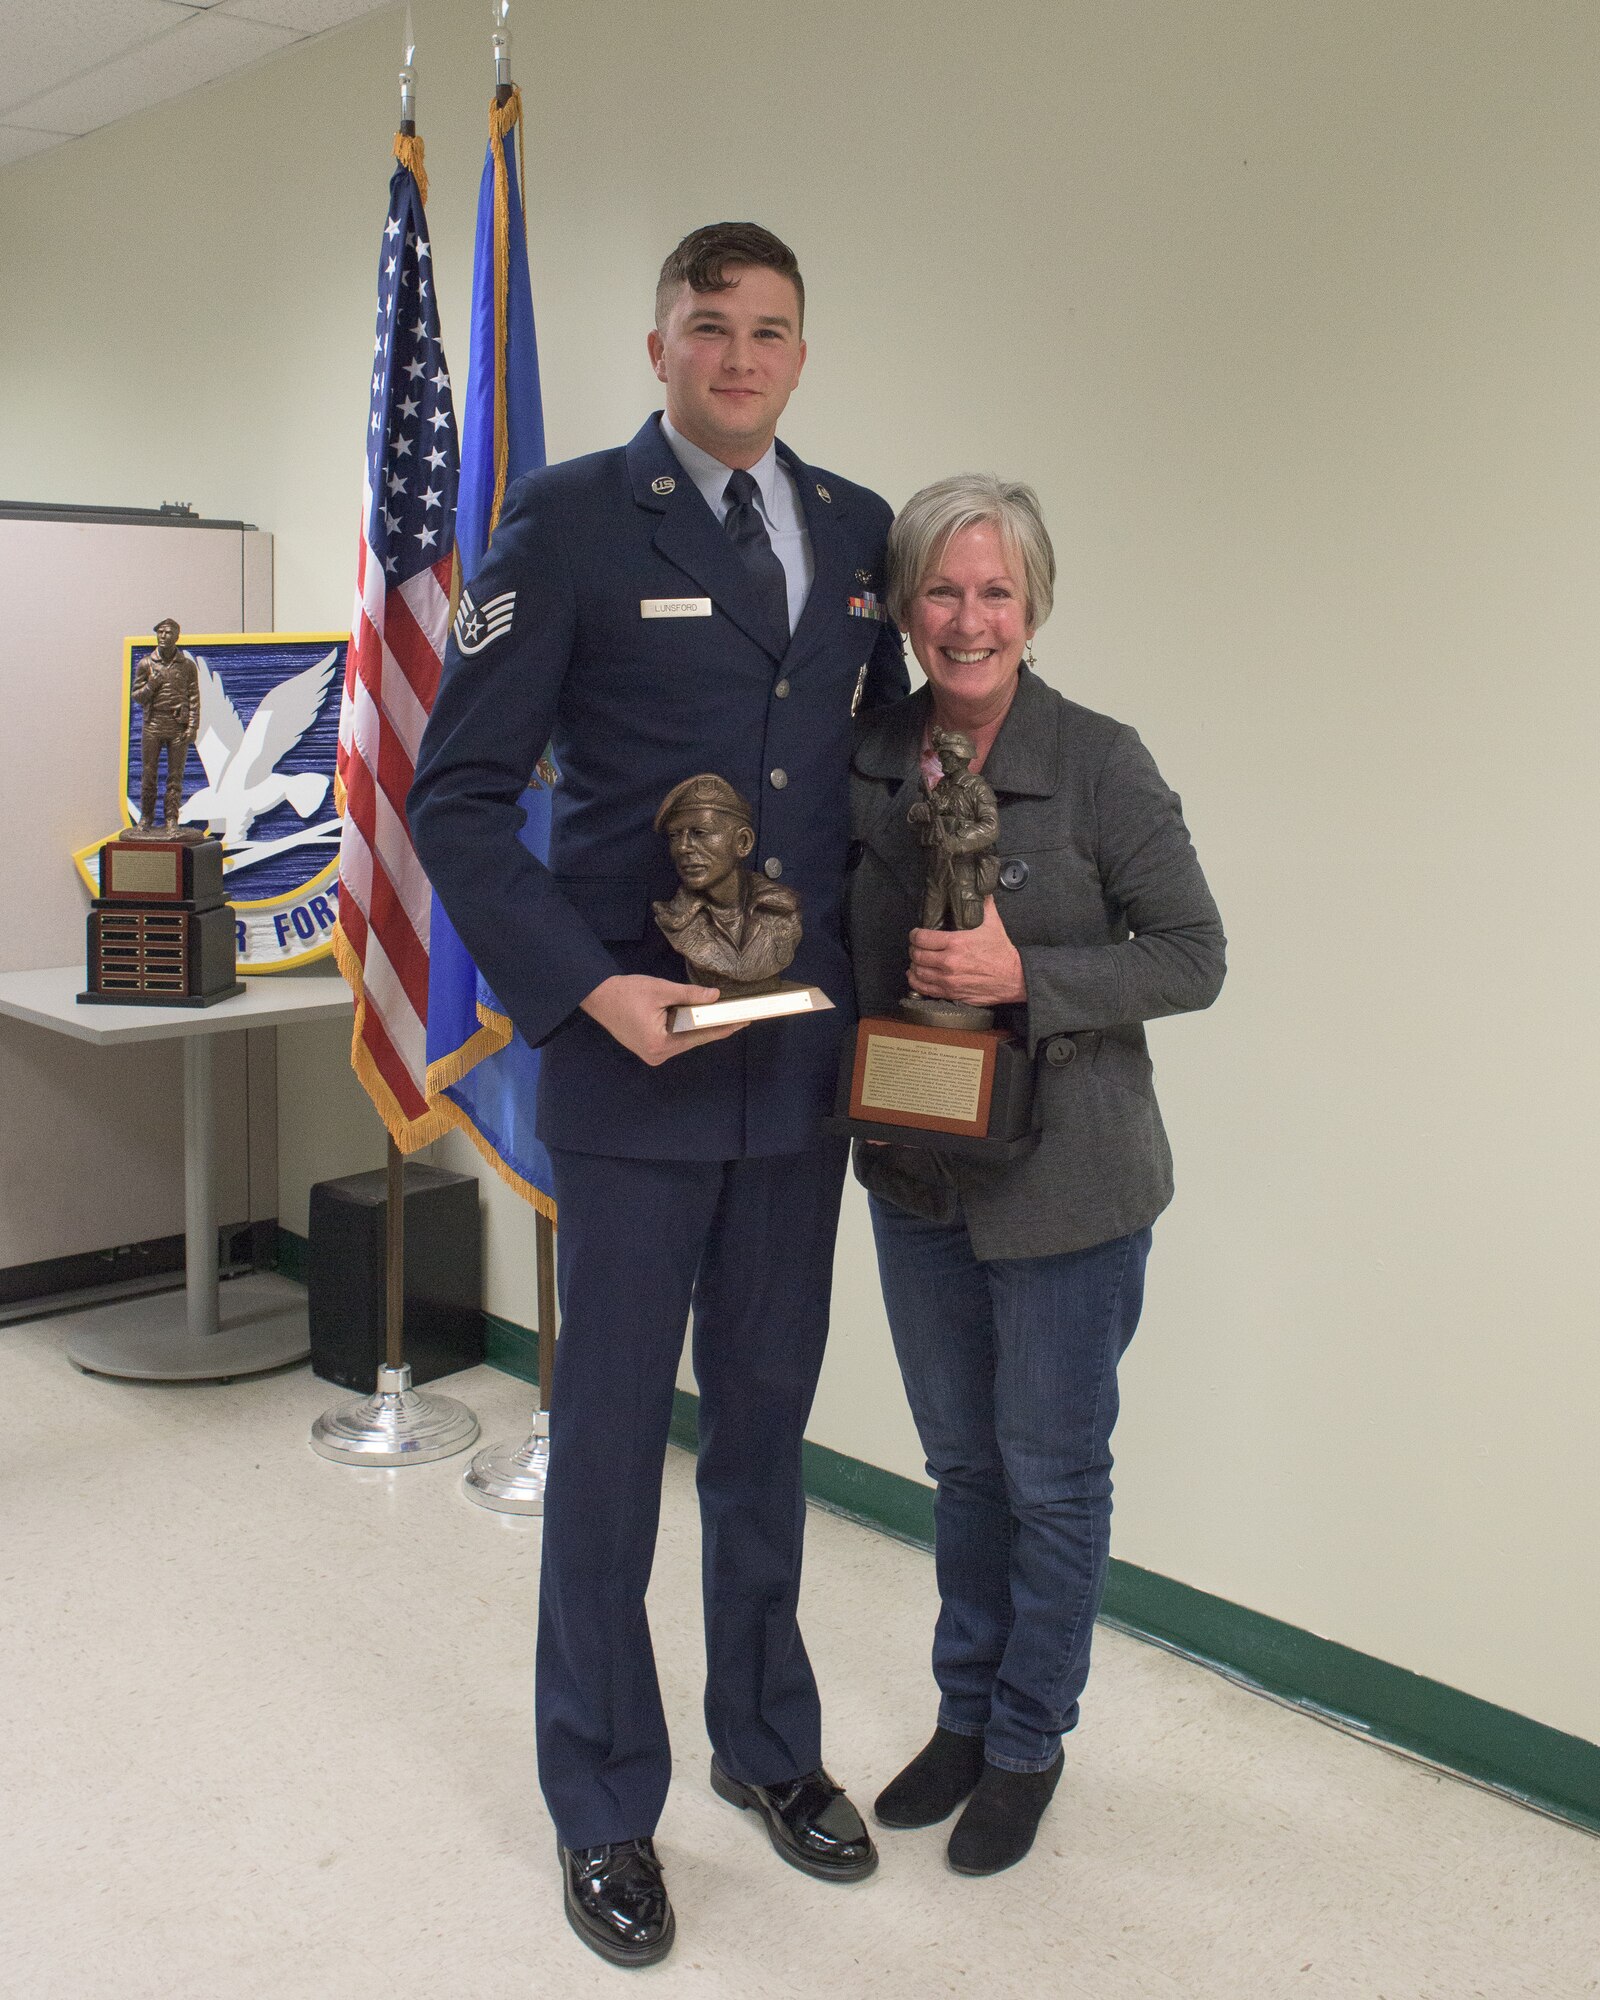 U.S. Air Force Staff Sgt. James Lunsford, 137th Special Operations Security Forces Squadron, poses with Phyllis Johnson, La Don Johnson's widow, after receiving the La Don Johnson Award during the first annual defender of the year award ceremony at Will Rogers Air National Guard Base in Oklahoma City, Feb. 3, 2018. The recipient of the award is chosen by peers of the 137 SOSFS Airmen for continued excellence in everyday duties. (U.S. Air National Guard photo by Tech. Sgt. Caroline Essex)